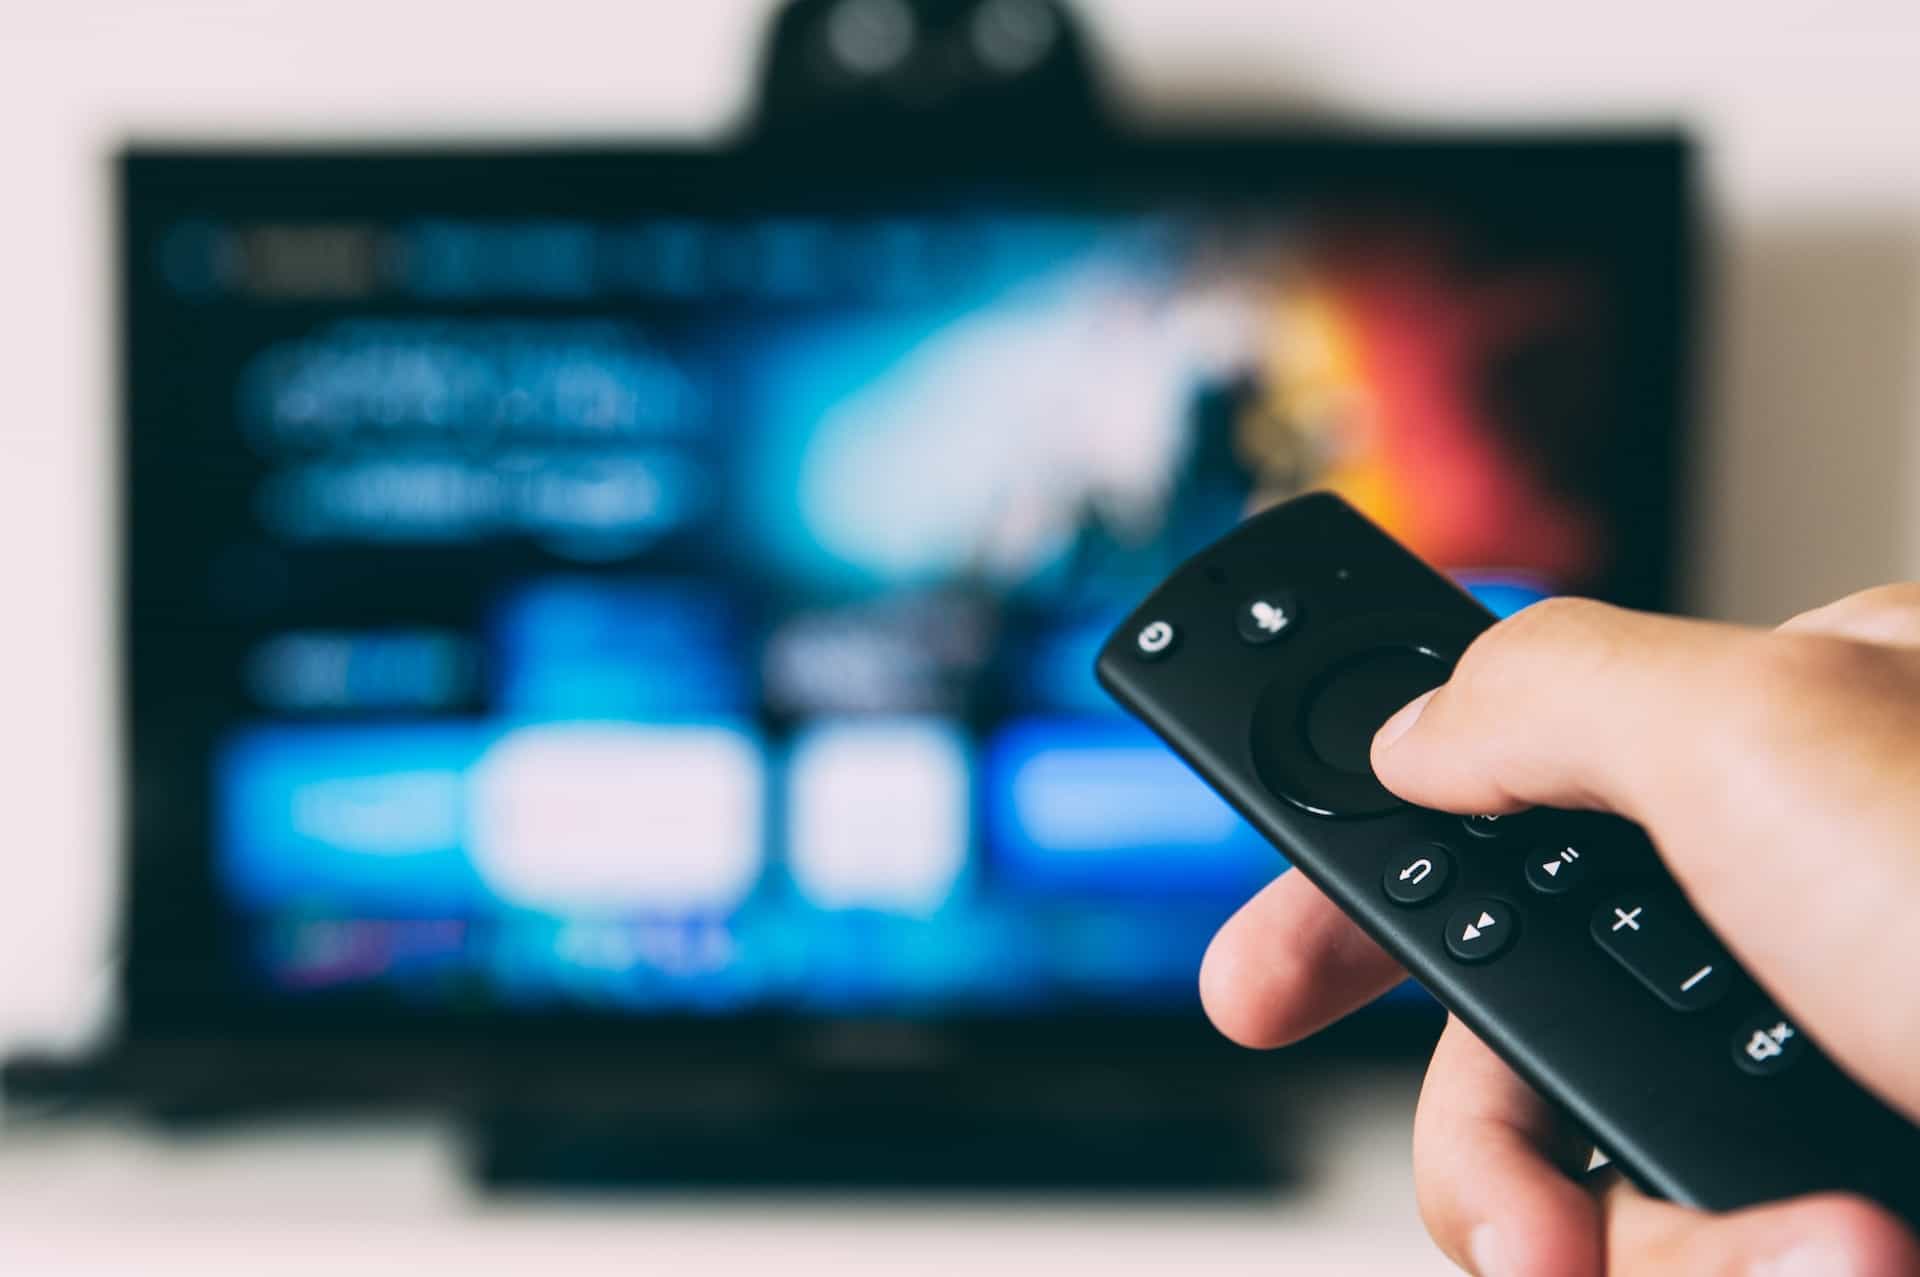 A person’s hand holding a smart TV remote which is being pointed at a television in the background.